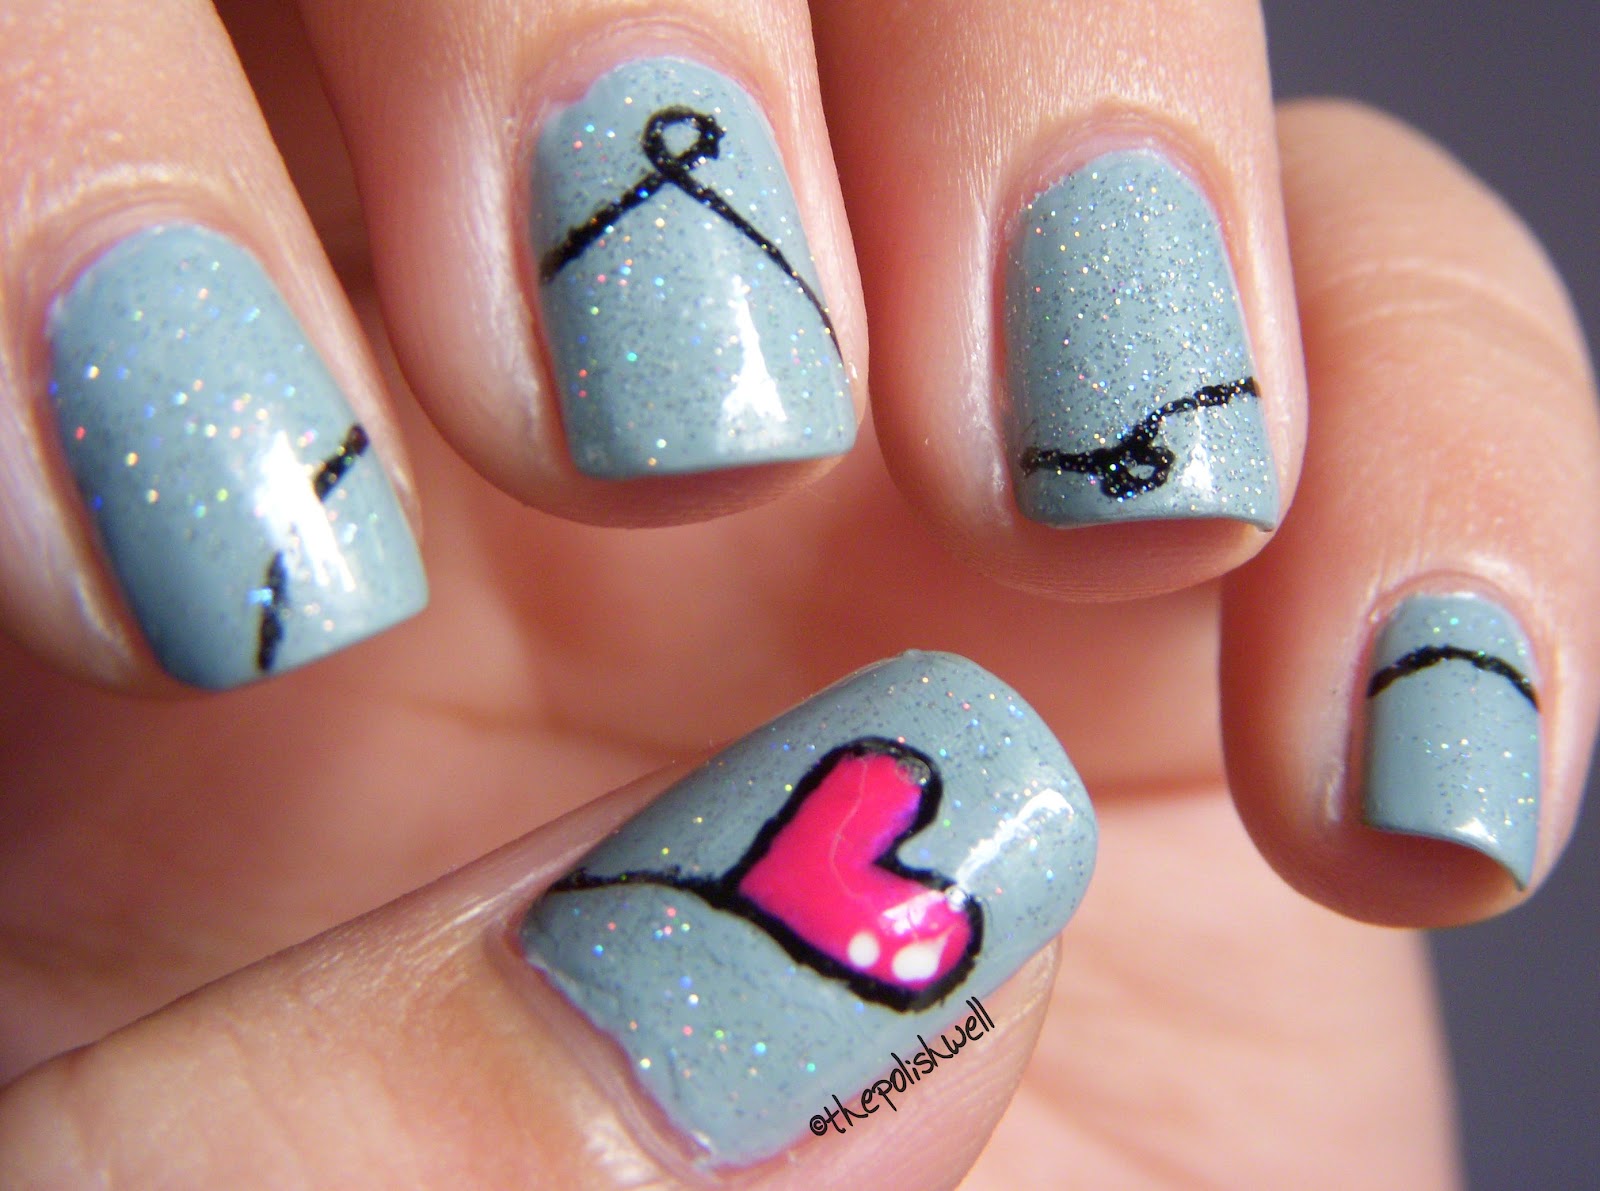 4. "Cute Heart Nail Designs for Short Nails" - wide 9